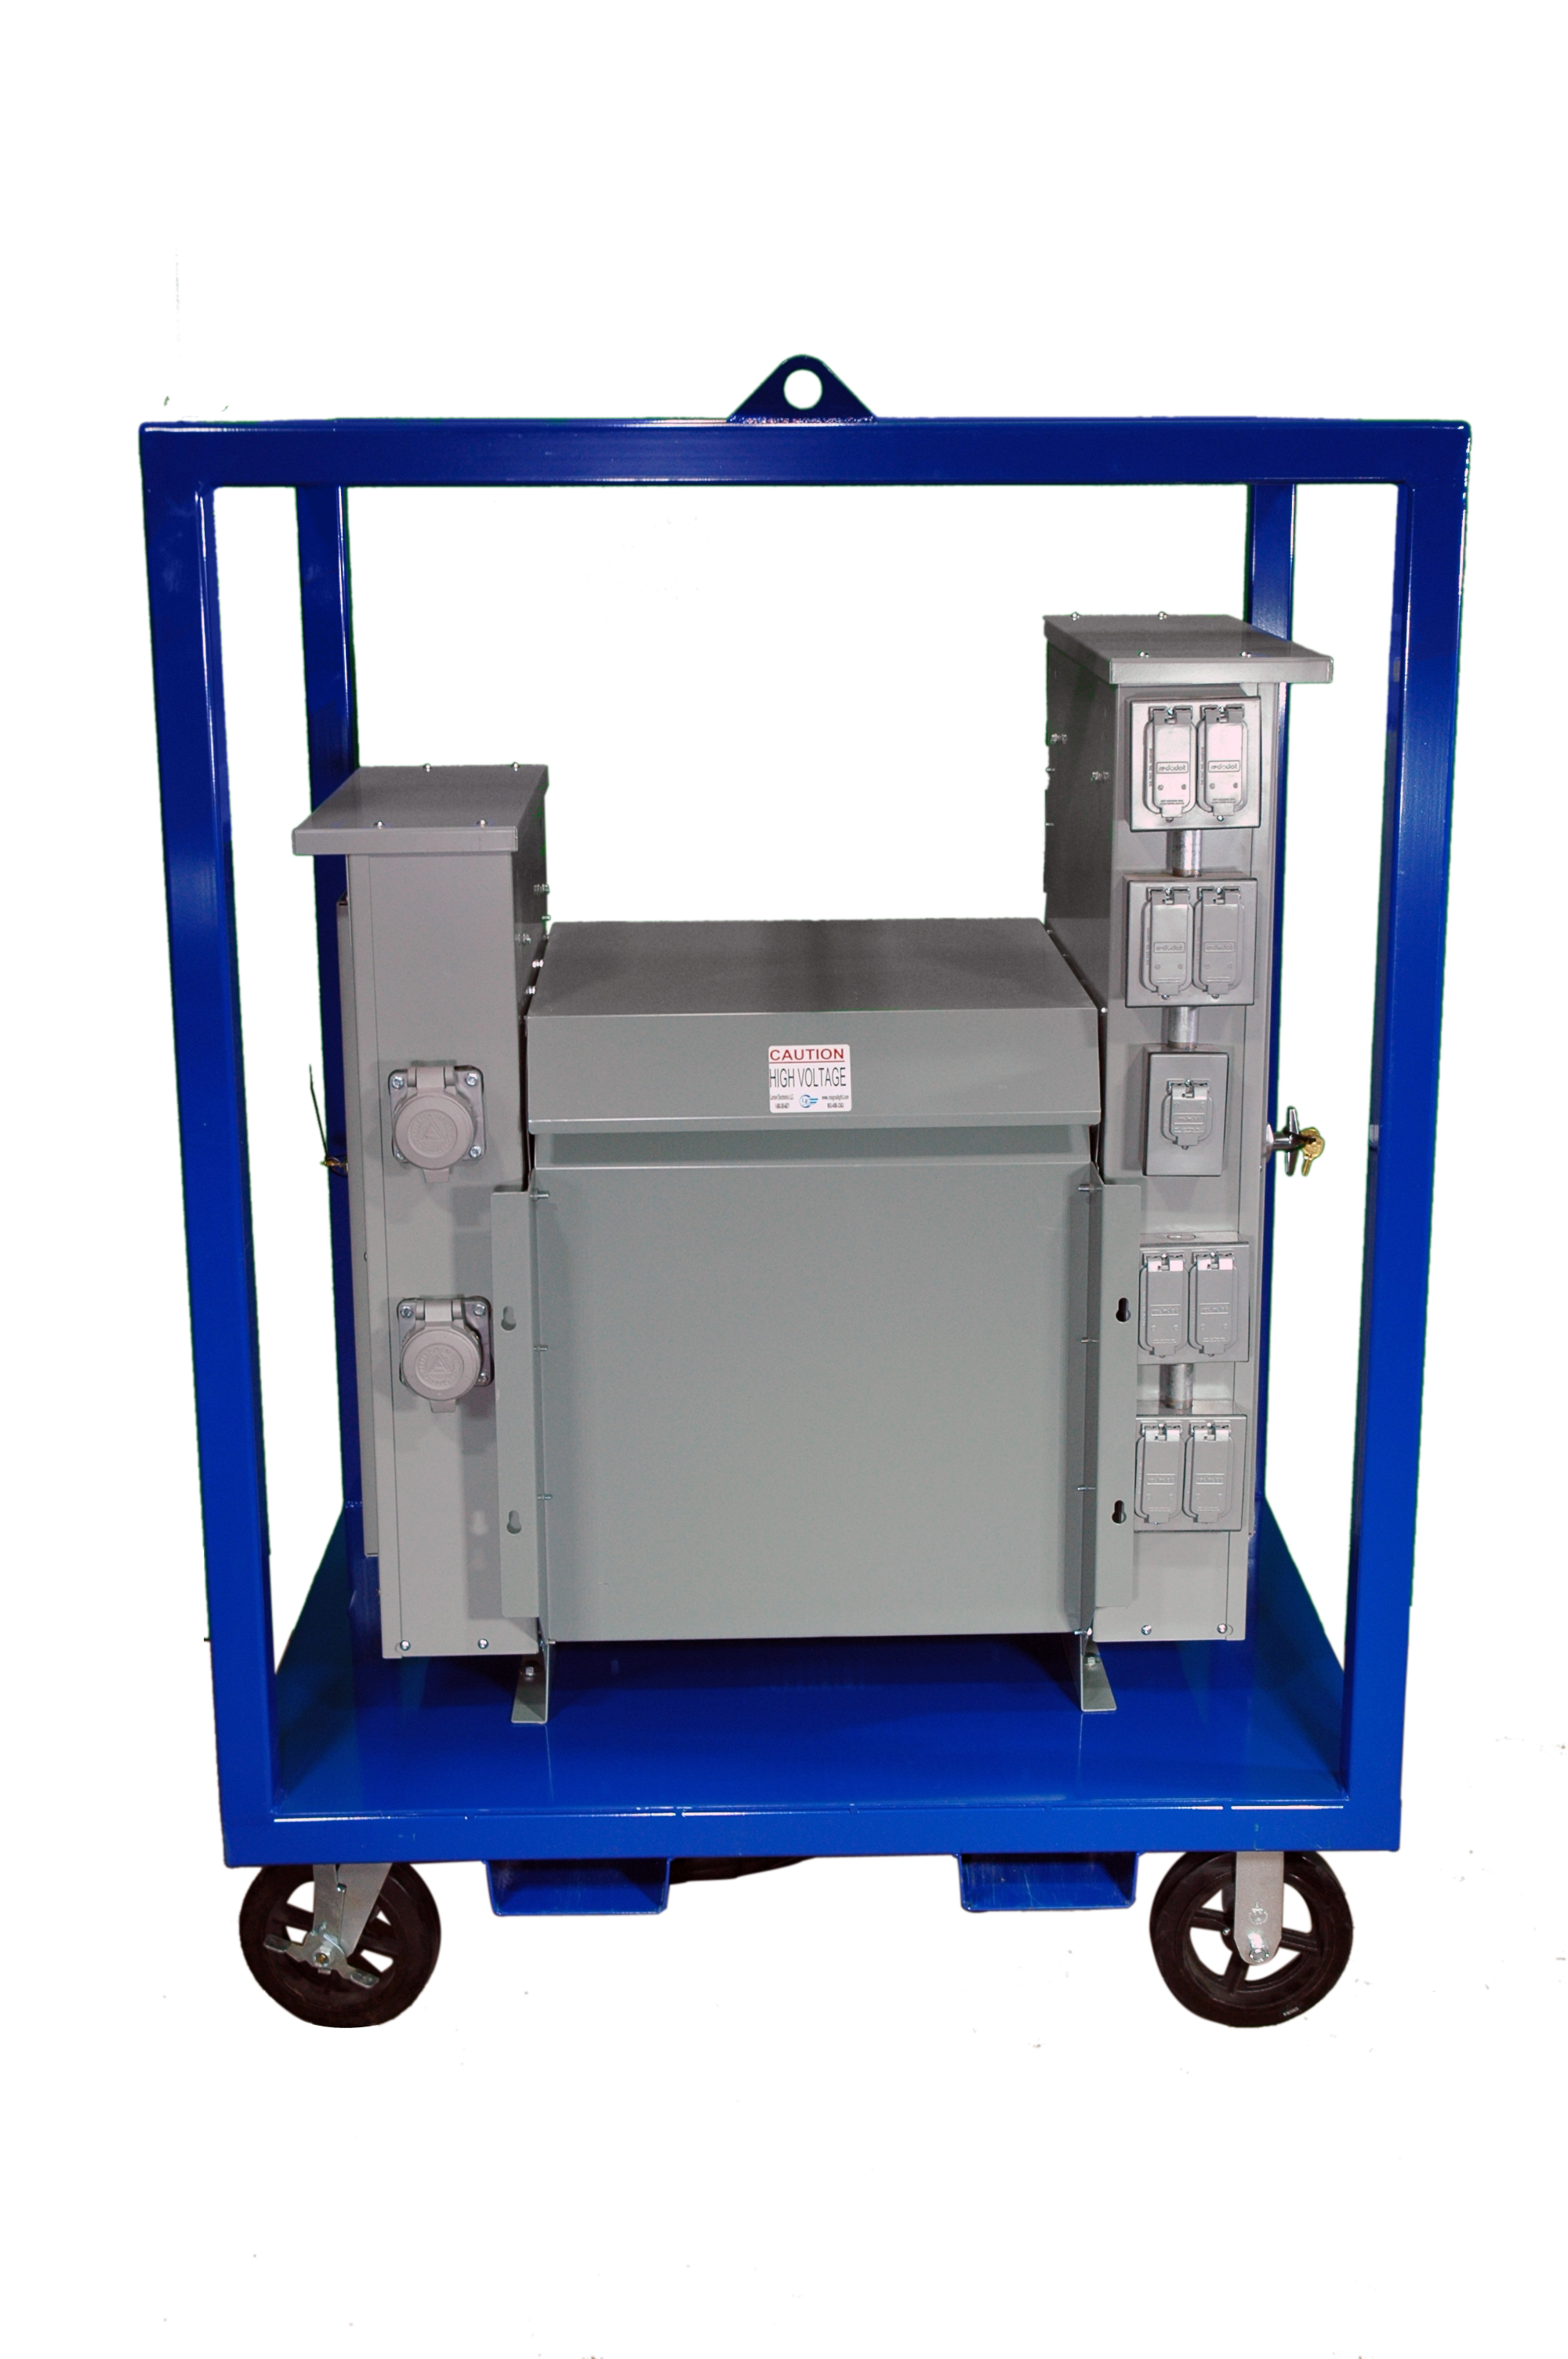 10 KVA Step Down Power Distribution System for Industrial Applications